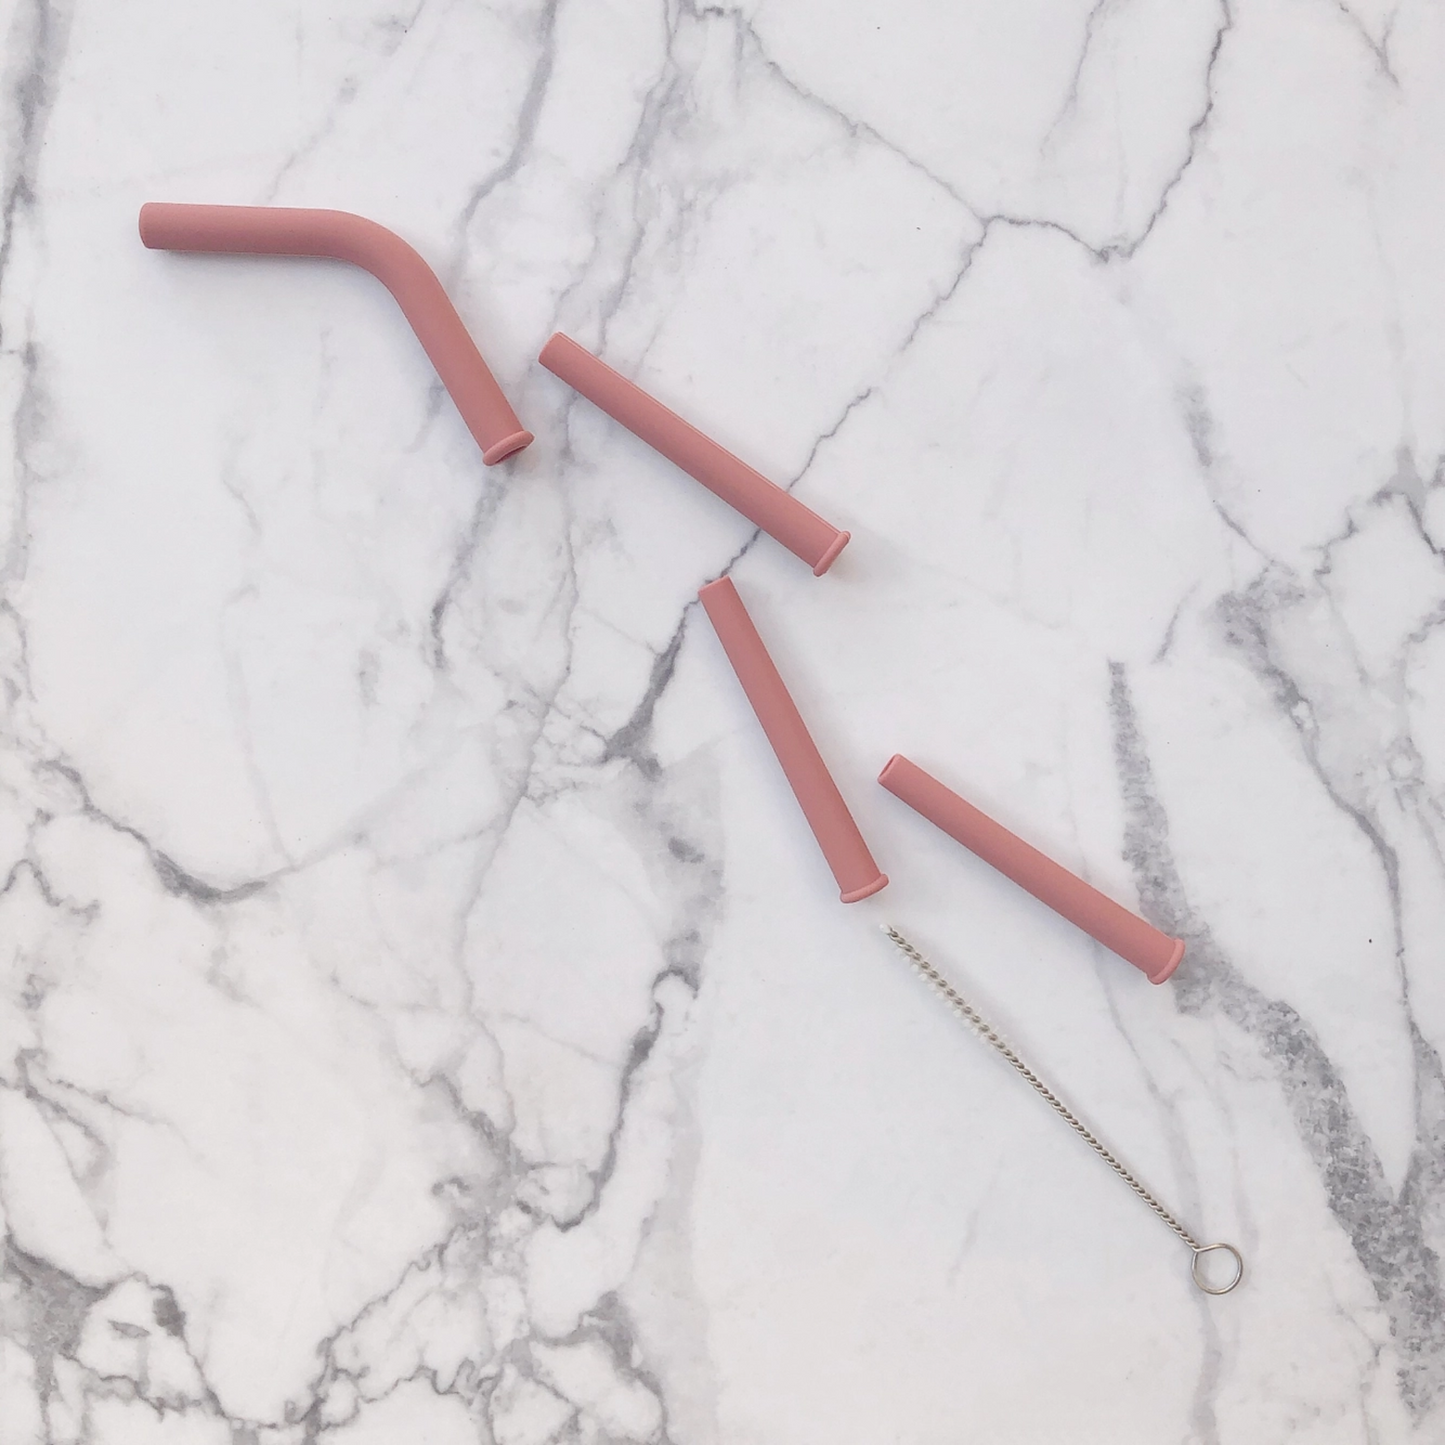 Build-A-Straw Reusable Silicone Straw in Individual Travel Case